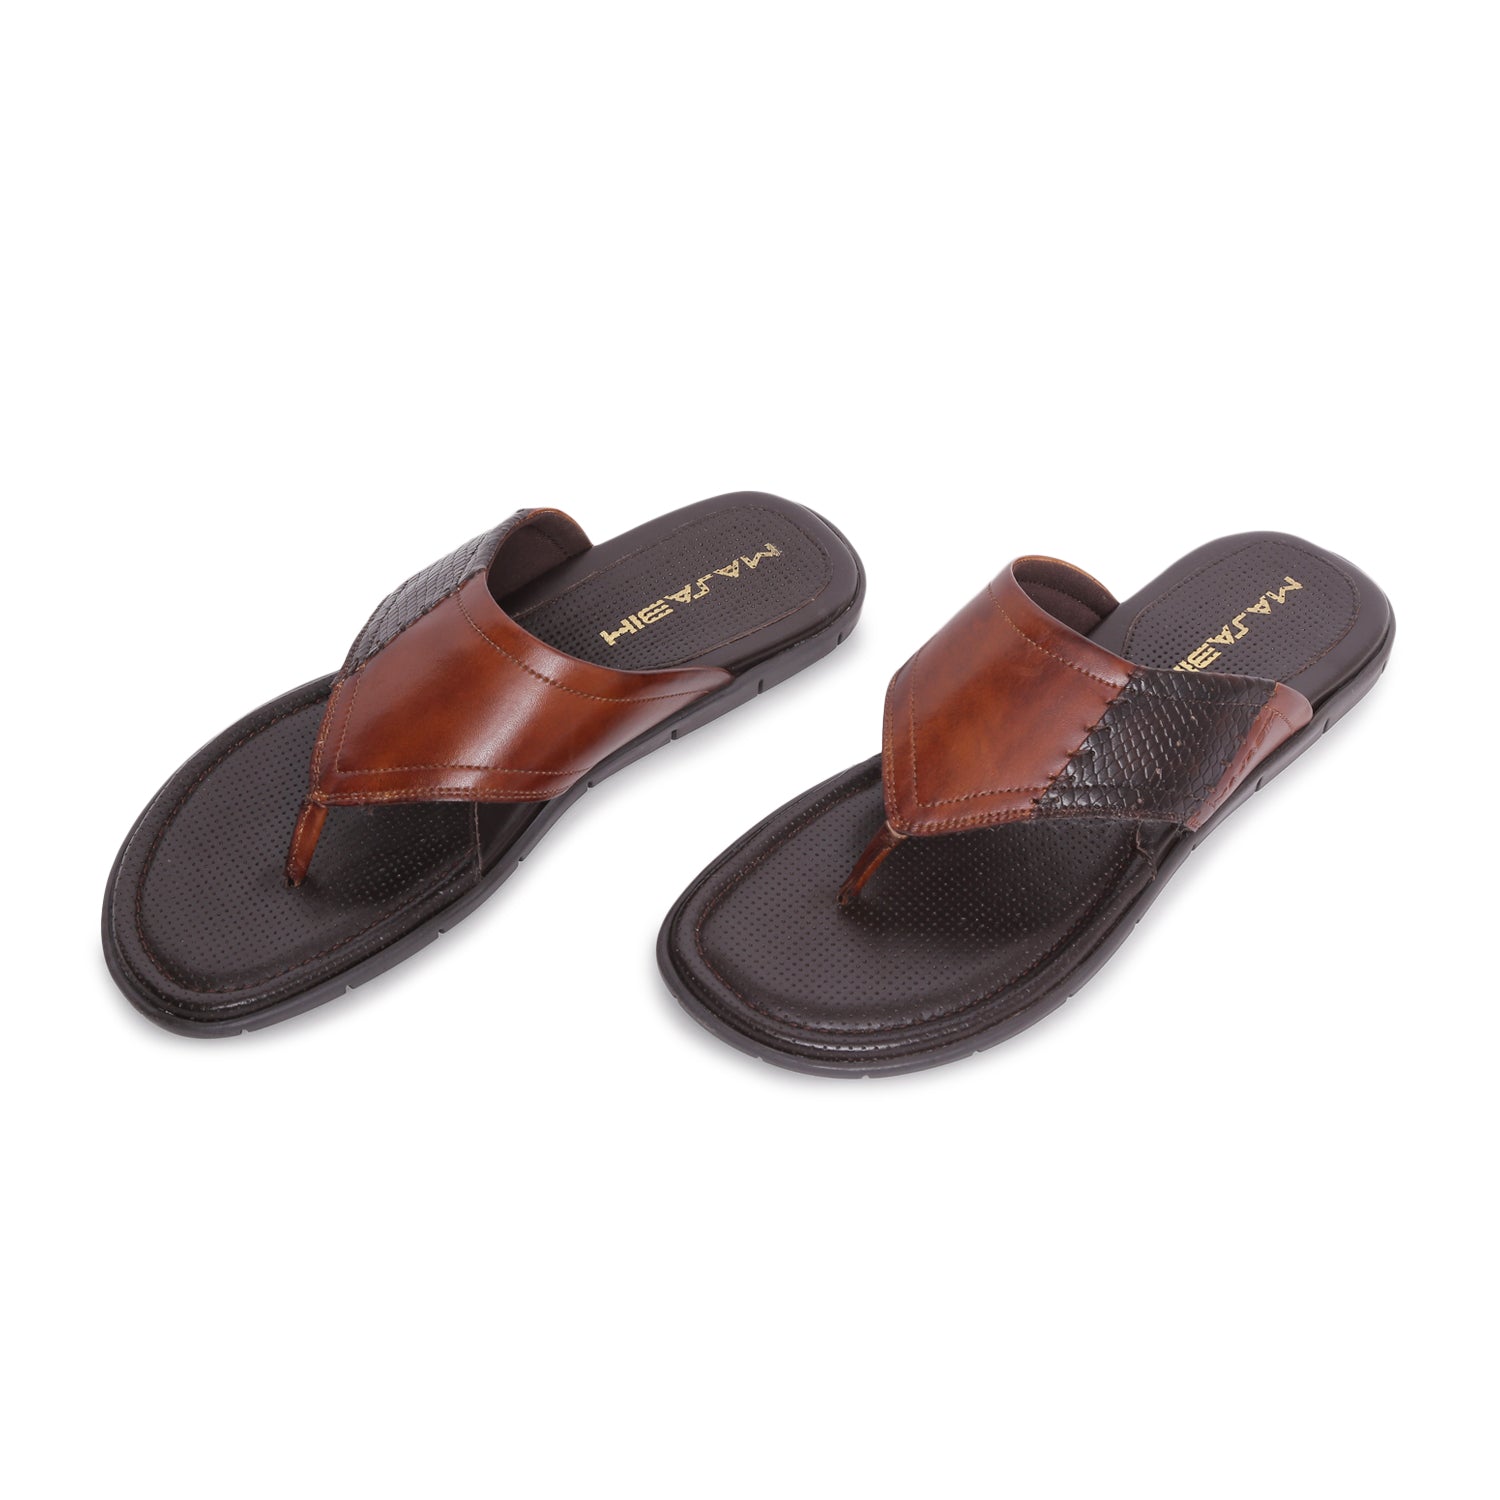 MASABIH Geniune Leather Soft Tan / SISSY Print Brown Color modern thong sandals for Mens